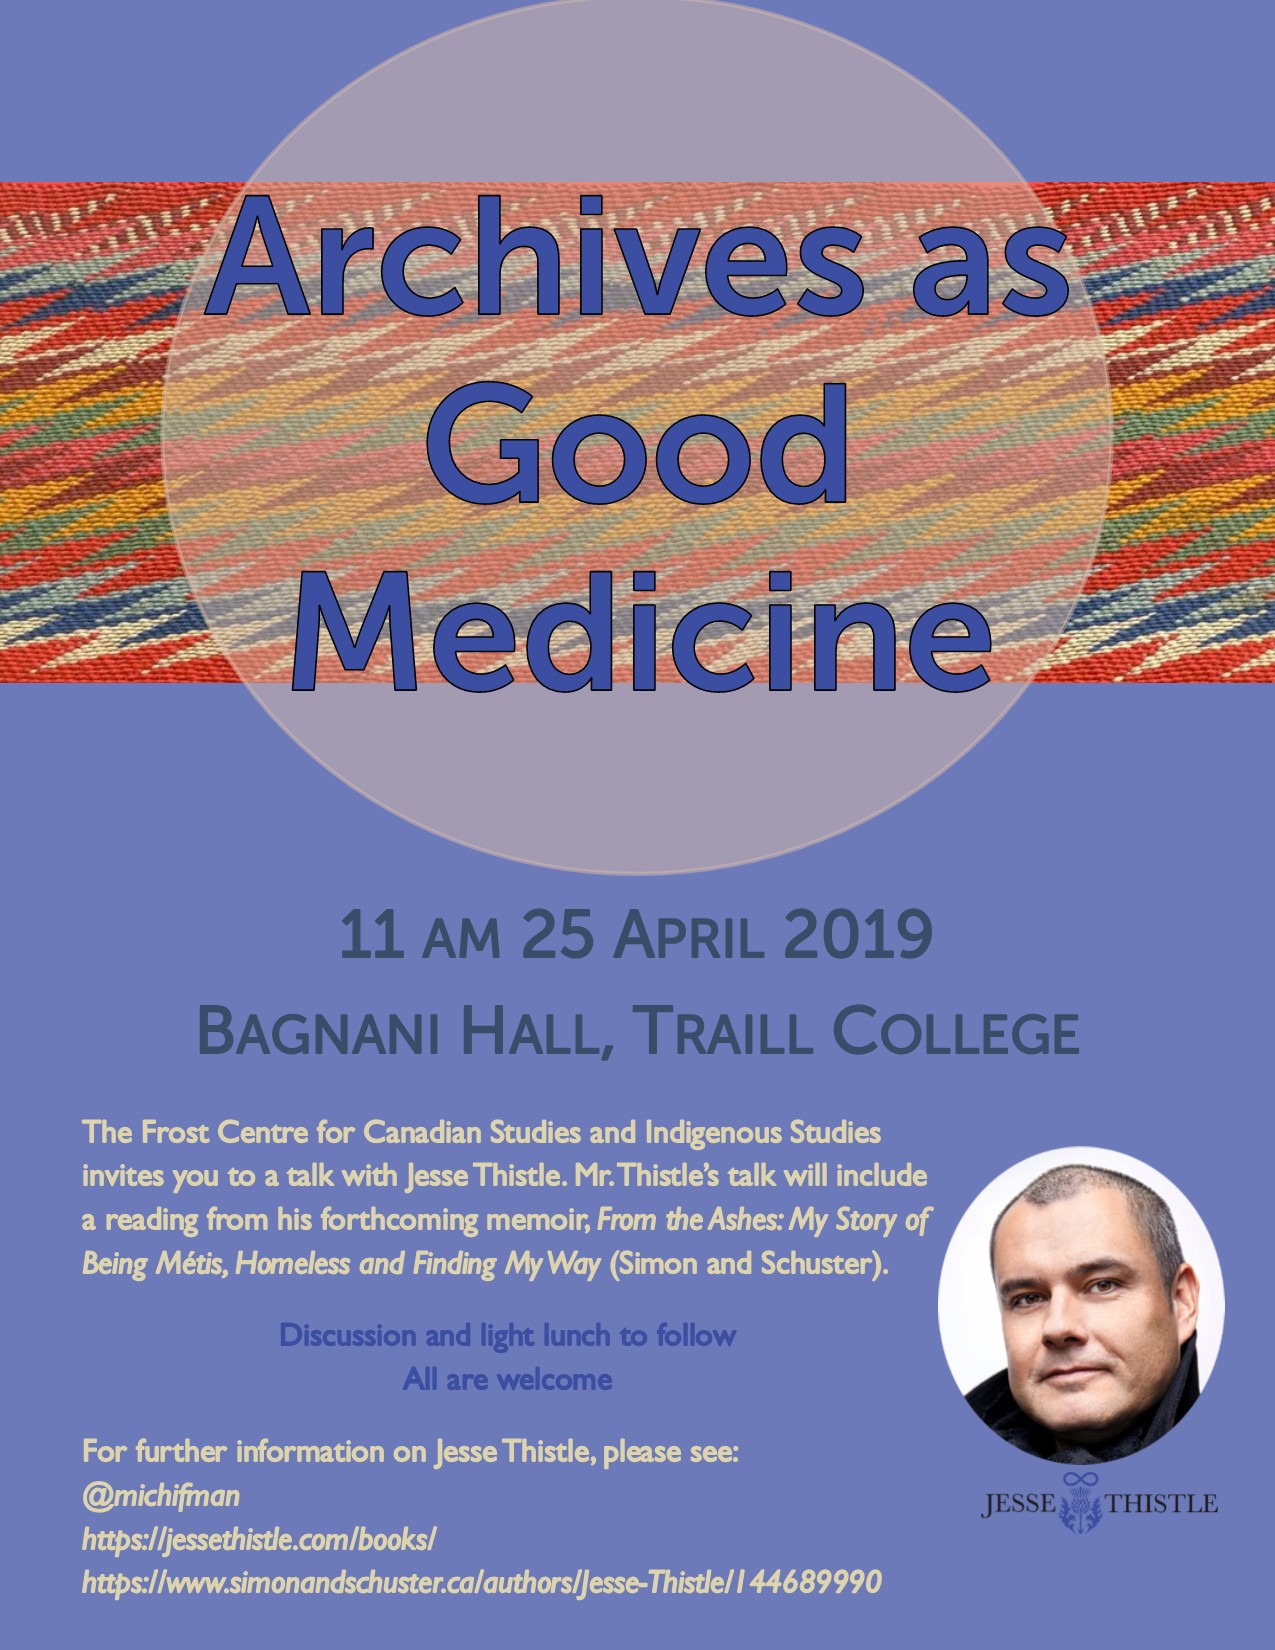 "Archives as Good Medicine" April 2019 with Jesse Thistle